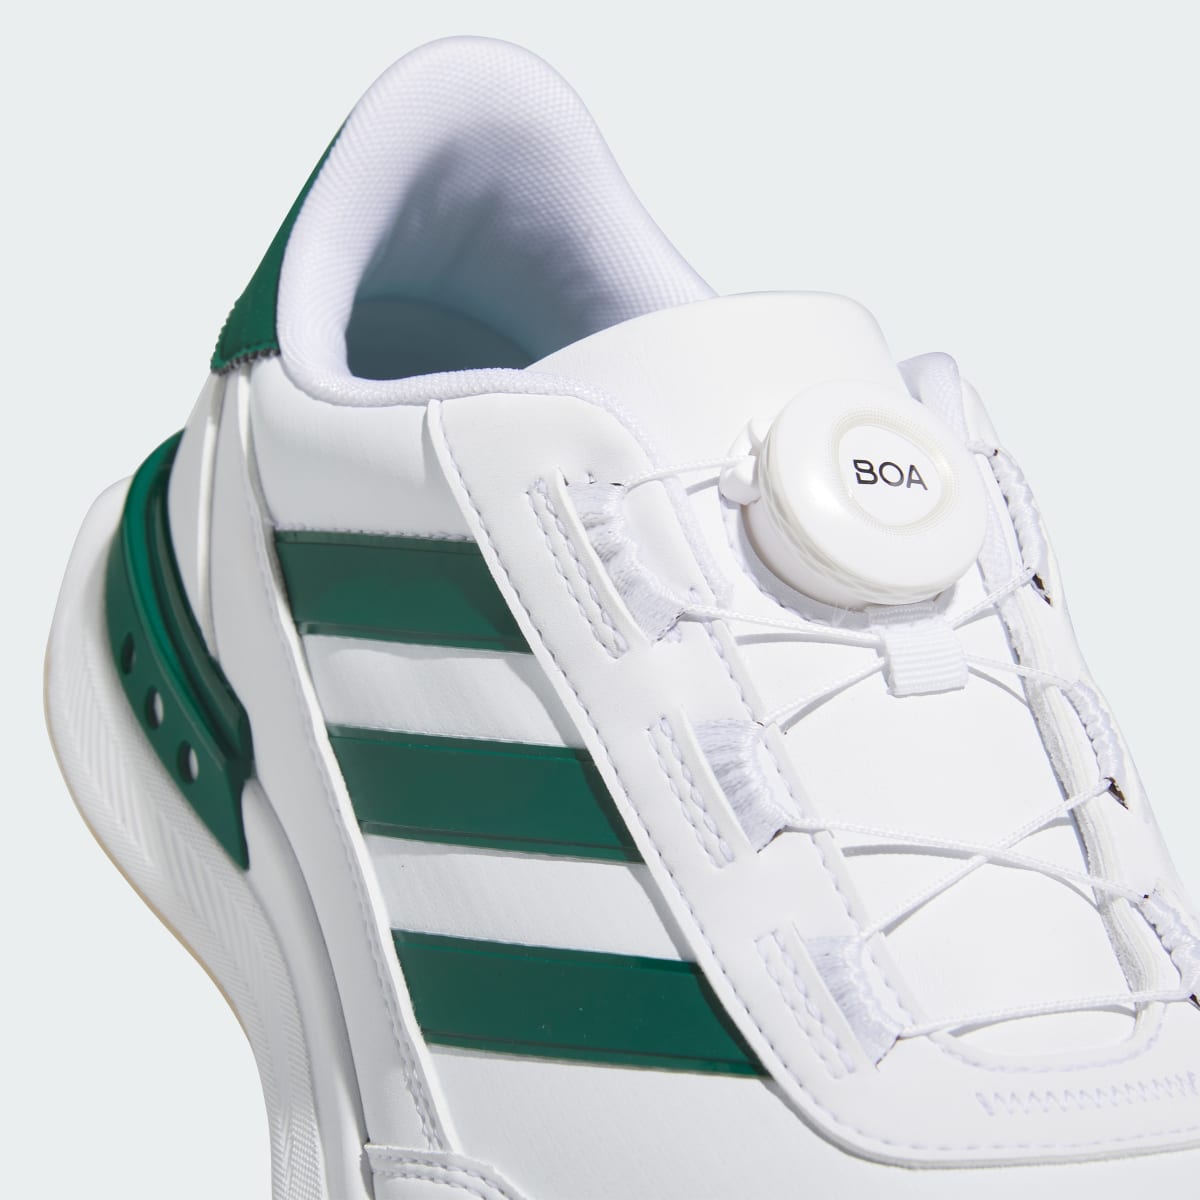 Adidas S2G BOA 24 Wide Spikeless Golf Shoes. 11